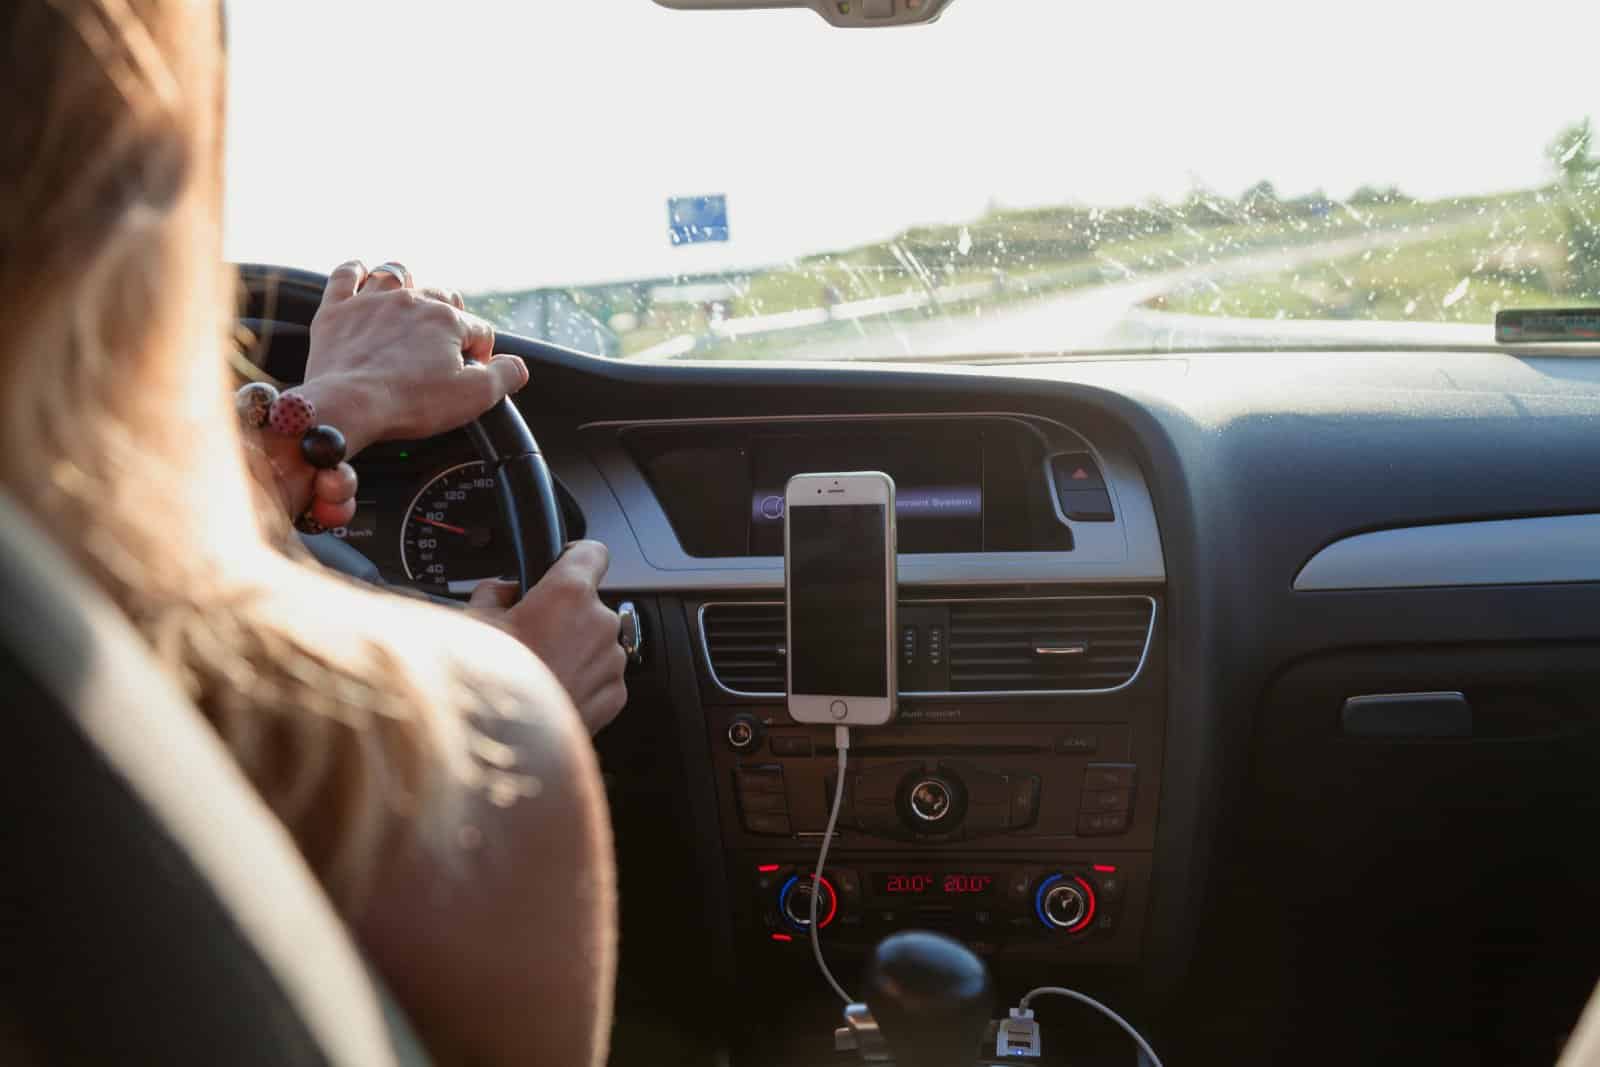 <p class="wp-caption-text">Image Credit: Pexels / Peter Fazekas</p>  <p><span>Keeping the family entertained is key to a harmonious road trip. A diverse mix of digital and traditional entertainment can cater to varying preferences and prevent boredom. Compile playlists of favorite music, download audiobooks, and ensure tablets have plenty of movies and games.</span></p> <p><span>Don’t overlook the value of classic car games that require no equipment, such as “I Spy” or “20 Questions,” which can be fun for all ages and stimulate conversation. Encouraging participation in navigation or trip planning can also engage older children and teens, making them feel more involved in the journey.</span></p> <p><b>Insider’s Tip: </b><span>Encourage creativity with travel journals or cameras for kids to document their journey, turning the trip into an interactive experience.</span></p>